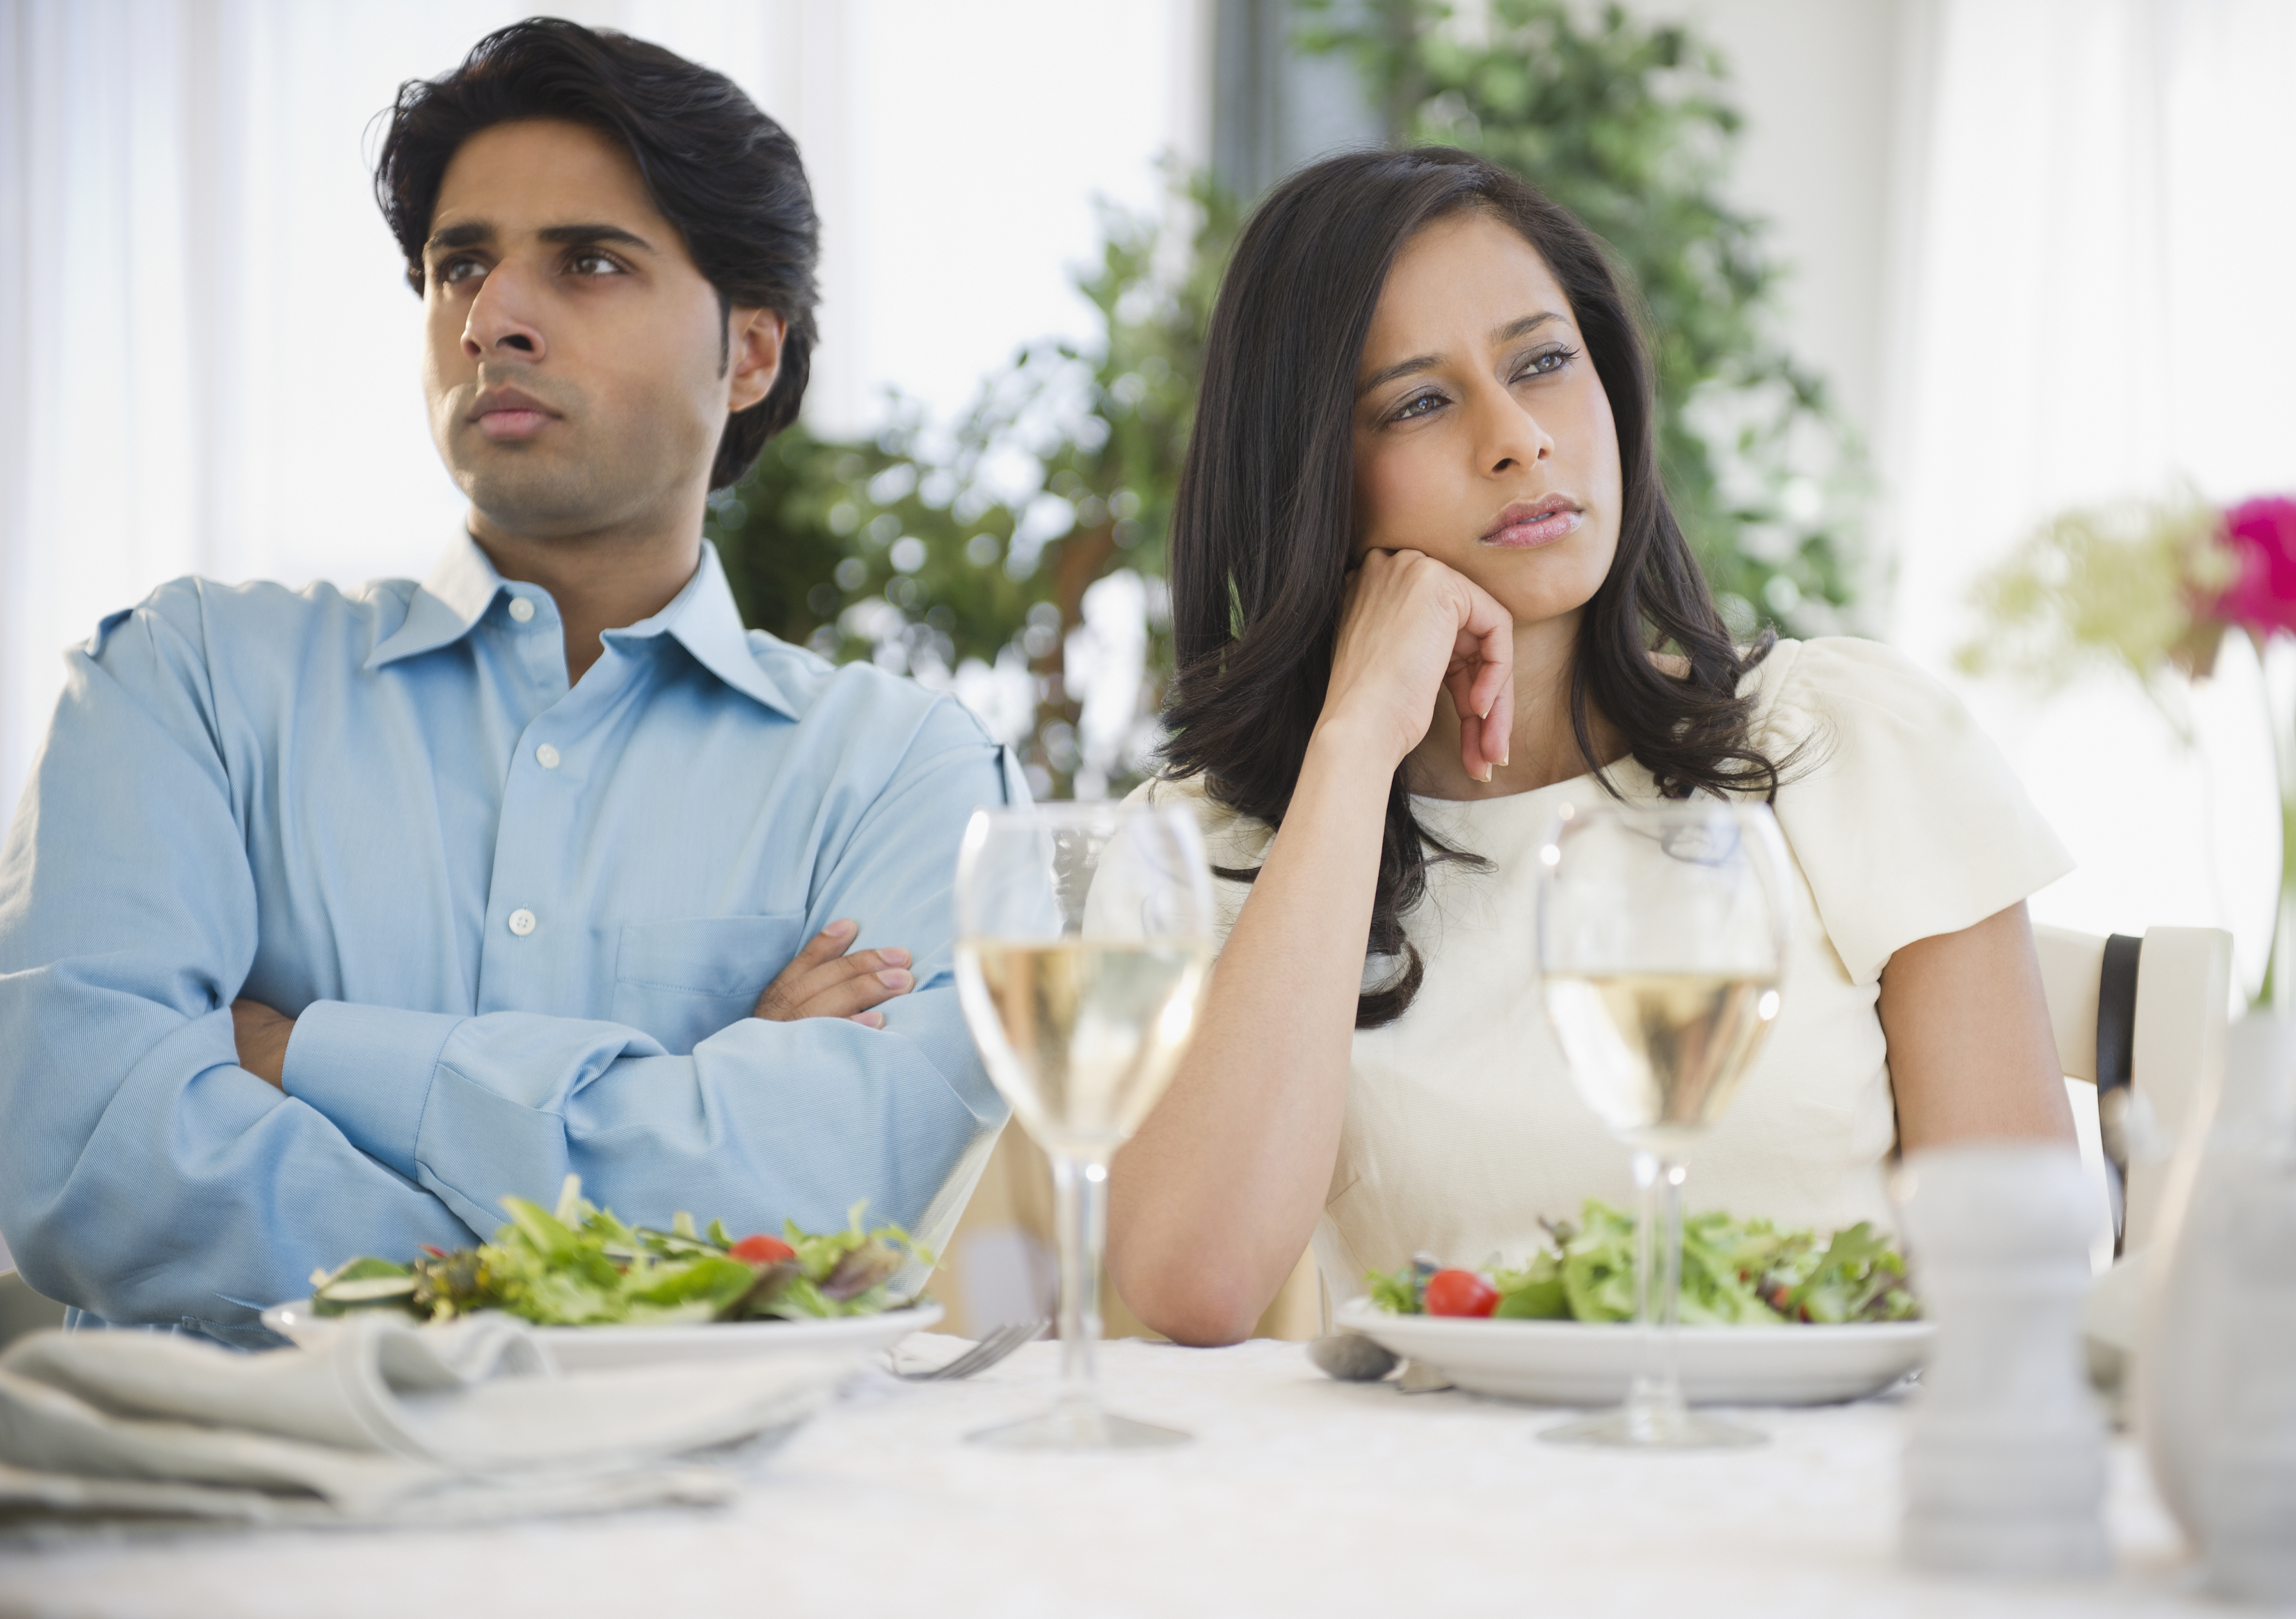 Angry couple dining together | Source: Getty Images